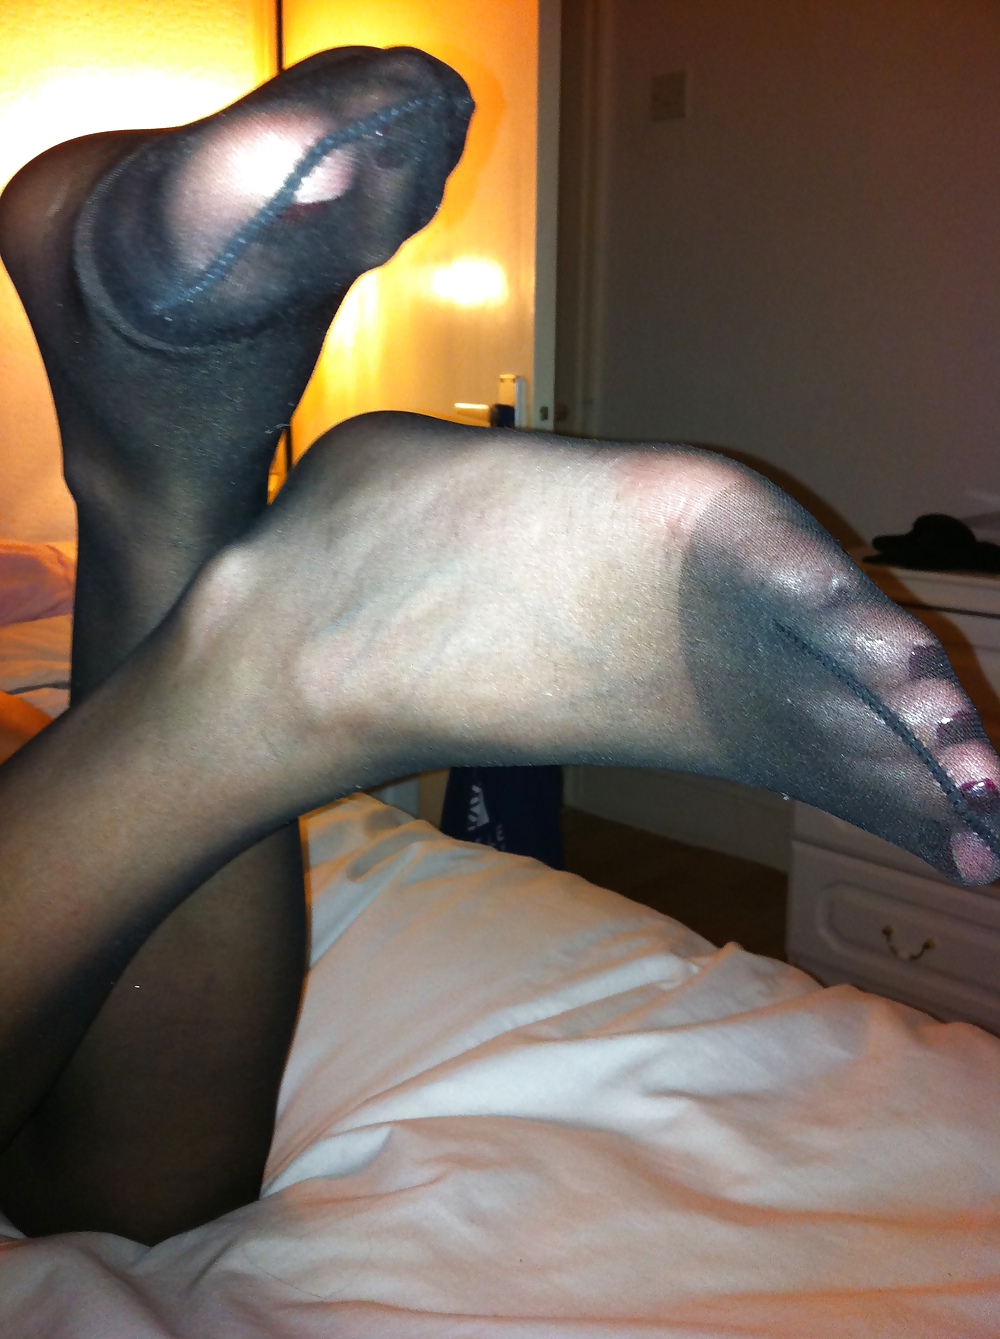 her sexy stocking feet i coverd in my cum porn pictures